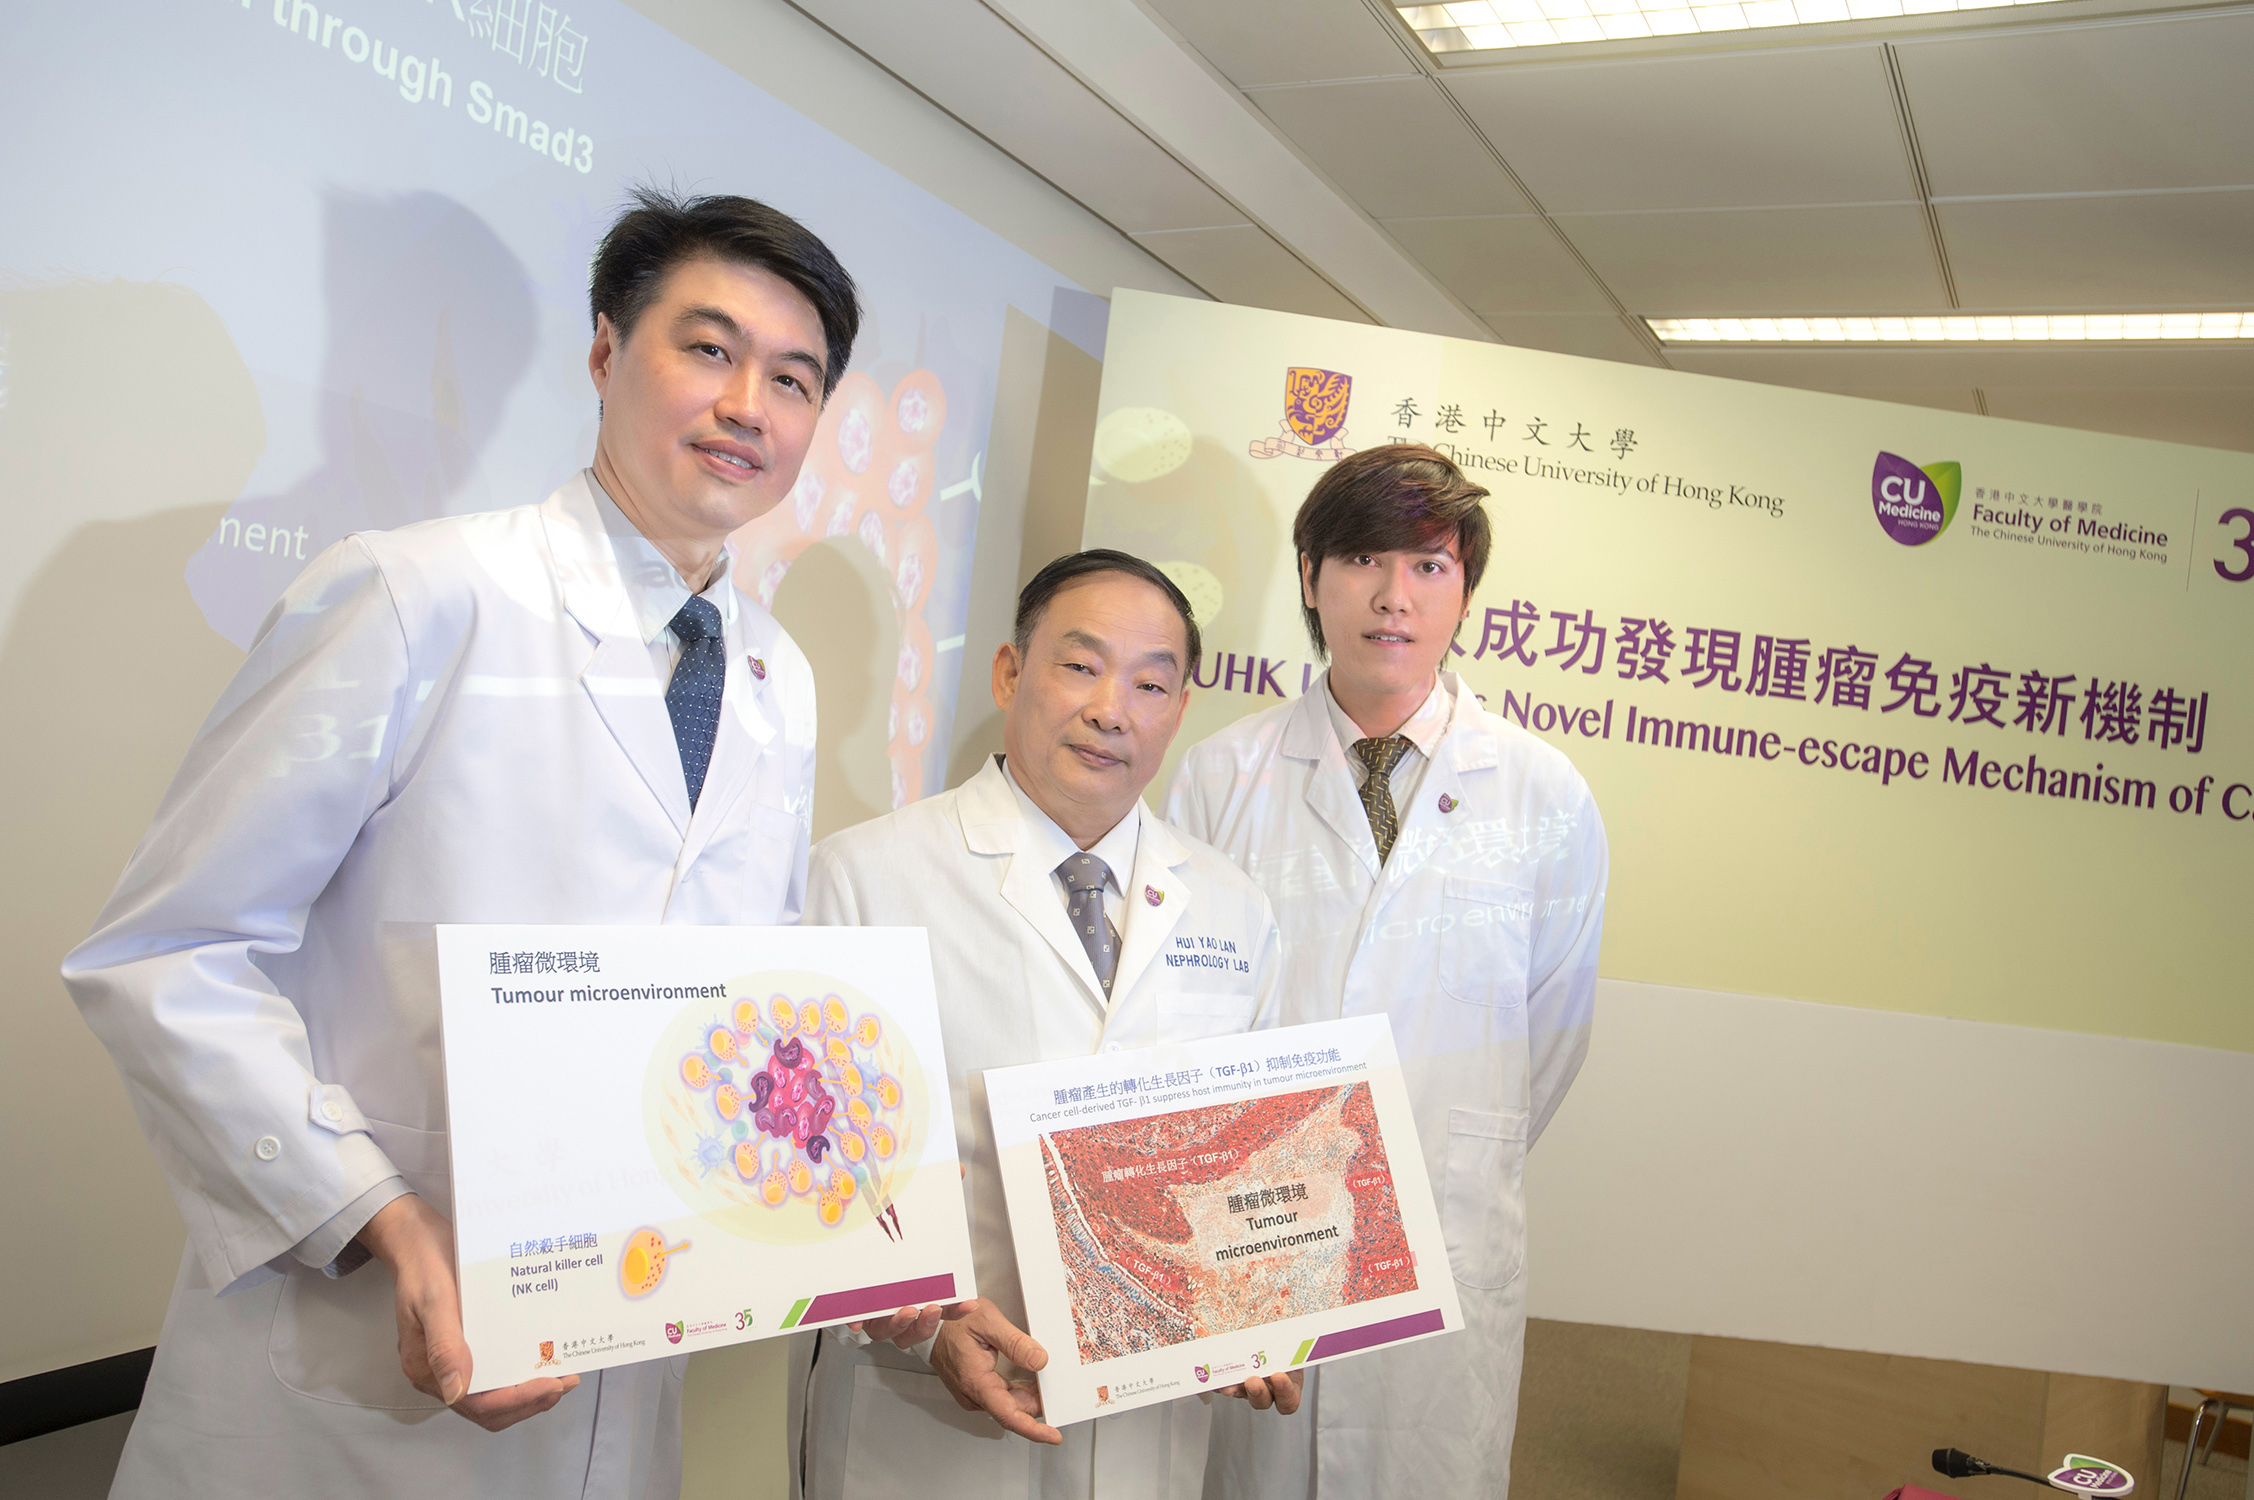 The Faculty of Medicine of CUHK uncovers how cancer cells defeat the frontline of immunity, thereby pointing new direction for immunotherapy. From left: Prof. Ka Fai TO, Chairman, Department of Anatomical and Cellular Pathology, Faculty of Medicine, CUHK; Prof. Hui Yao LAN, Choh-Ming Li Professor of Biomedical Sciences and Assistant Dean (Research), Faculty of Medicine, CUHK; Dr. Patrick Ming Kuen TANG, Research Associate, Department of of Anatomical and Cellular Pathology, Faculty of Medicine, CUHK.